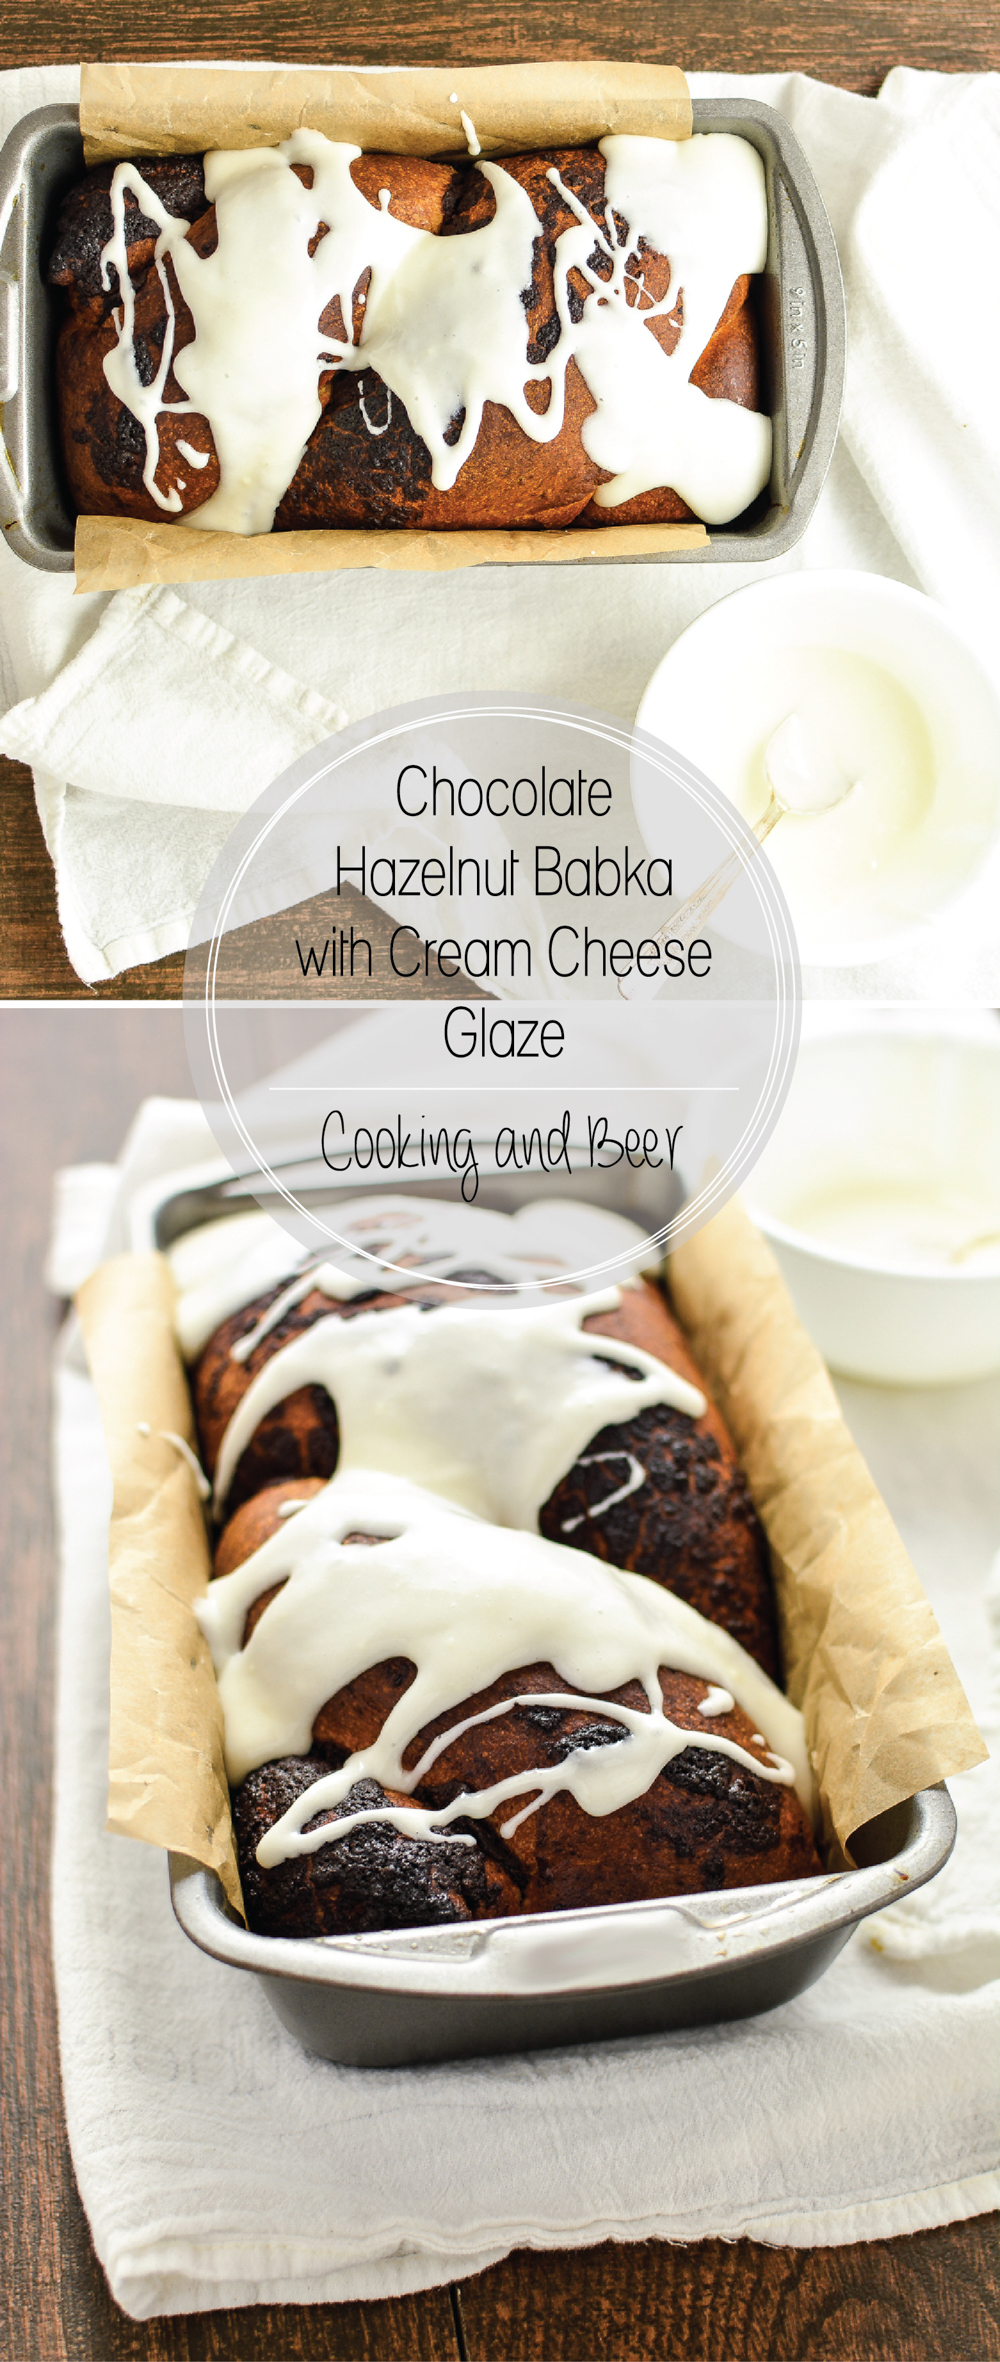 This not so traditional Chocolate Hazelnut Babka with Cream Cheese Glaze is the perfect sweet bread for breakfast or dessert!